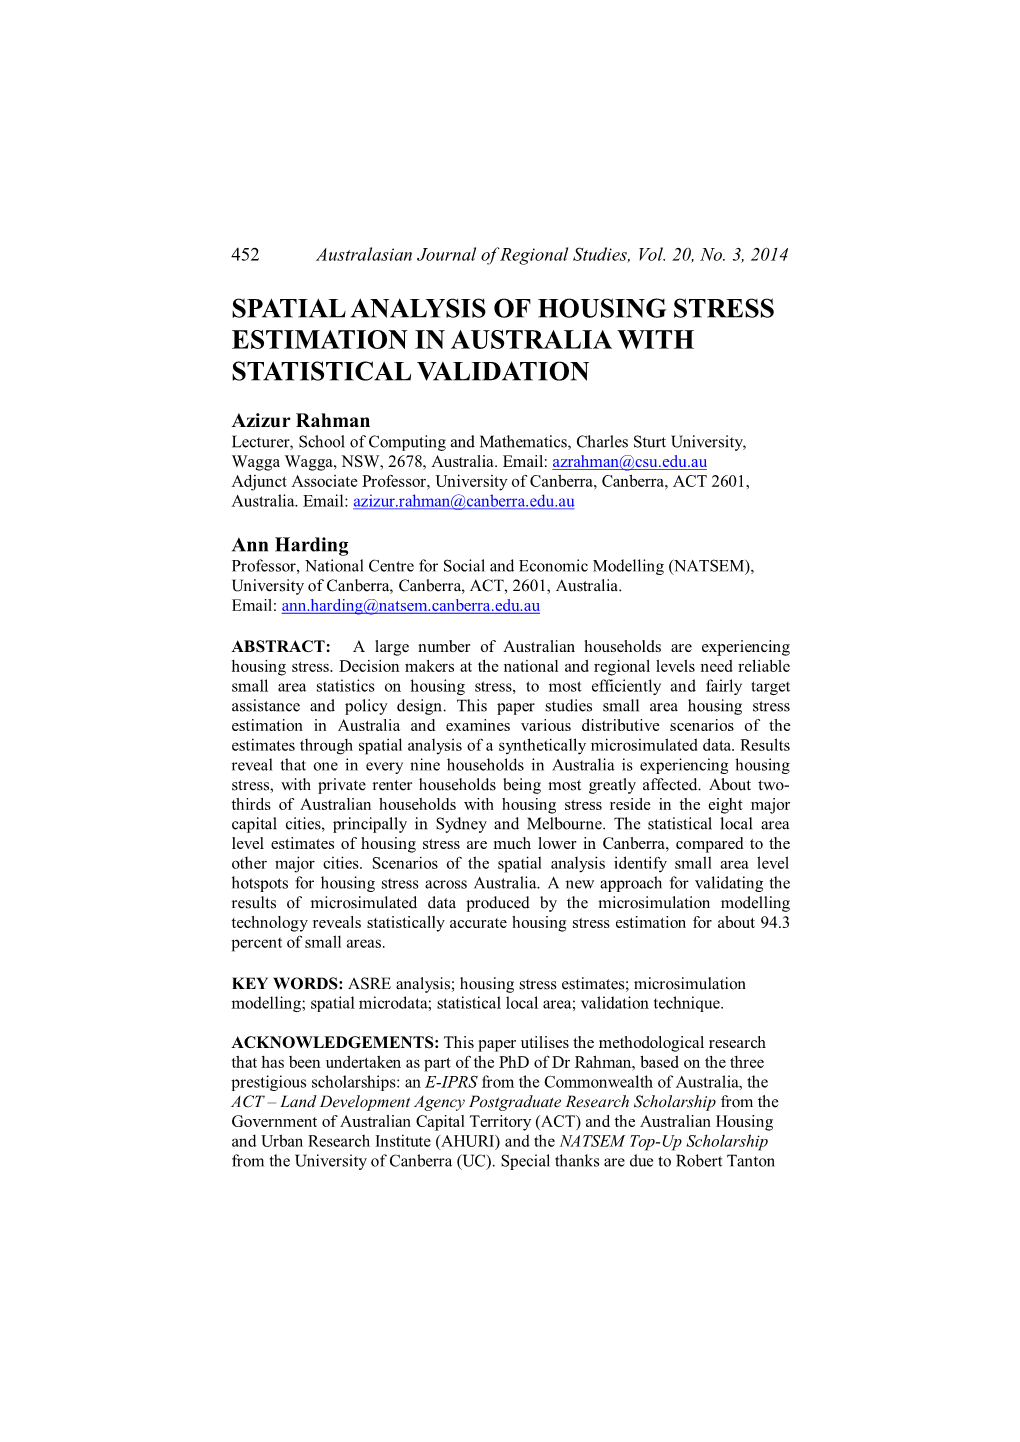 Spatial Analysis of Housing Stress Estimation in Australia with Statistical Validation